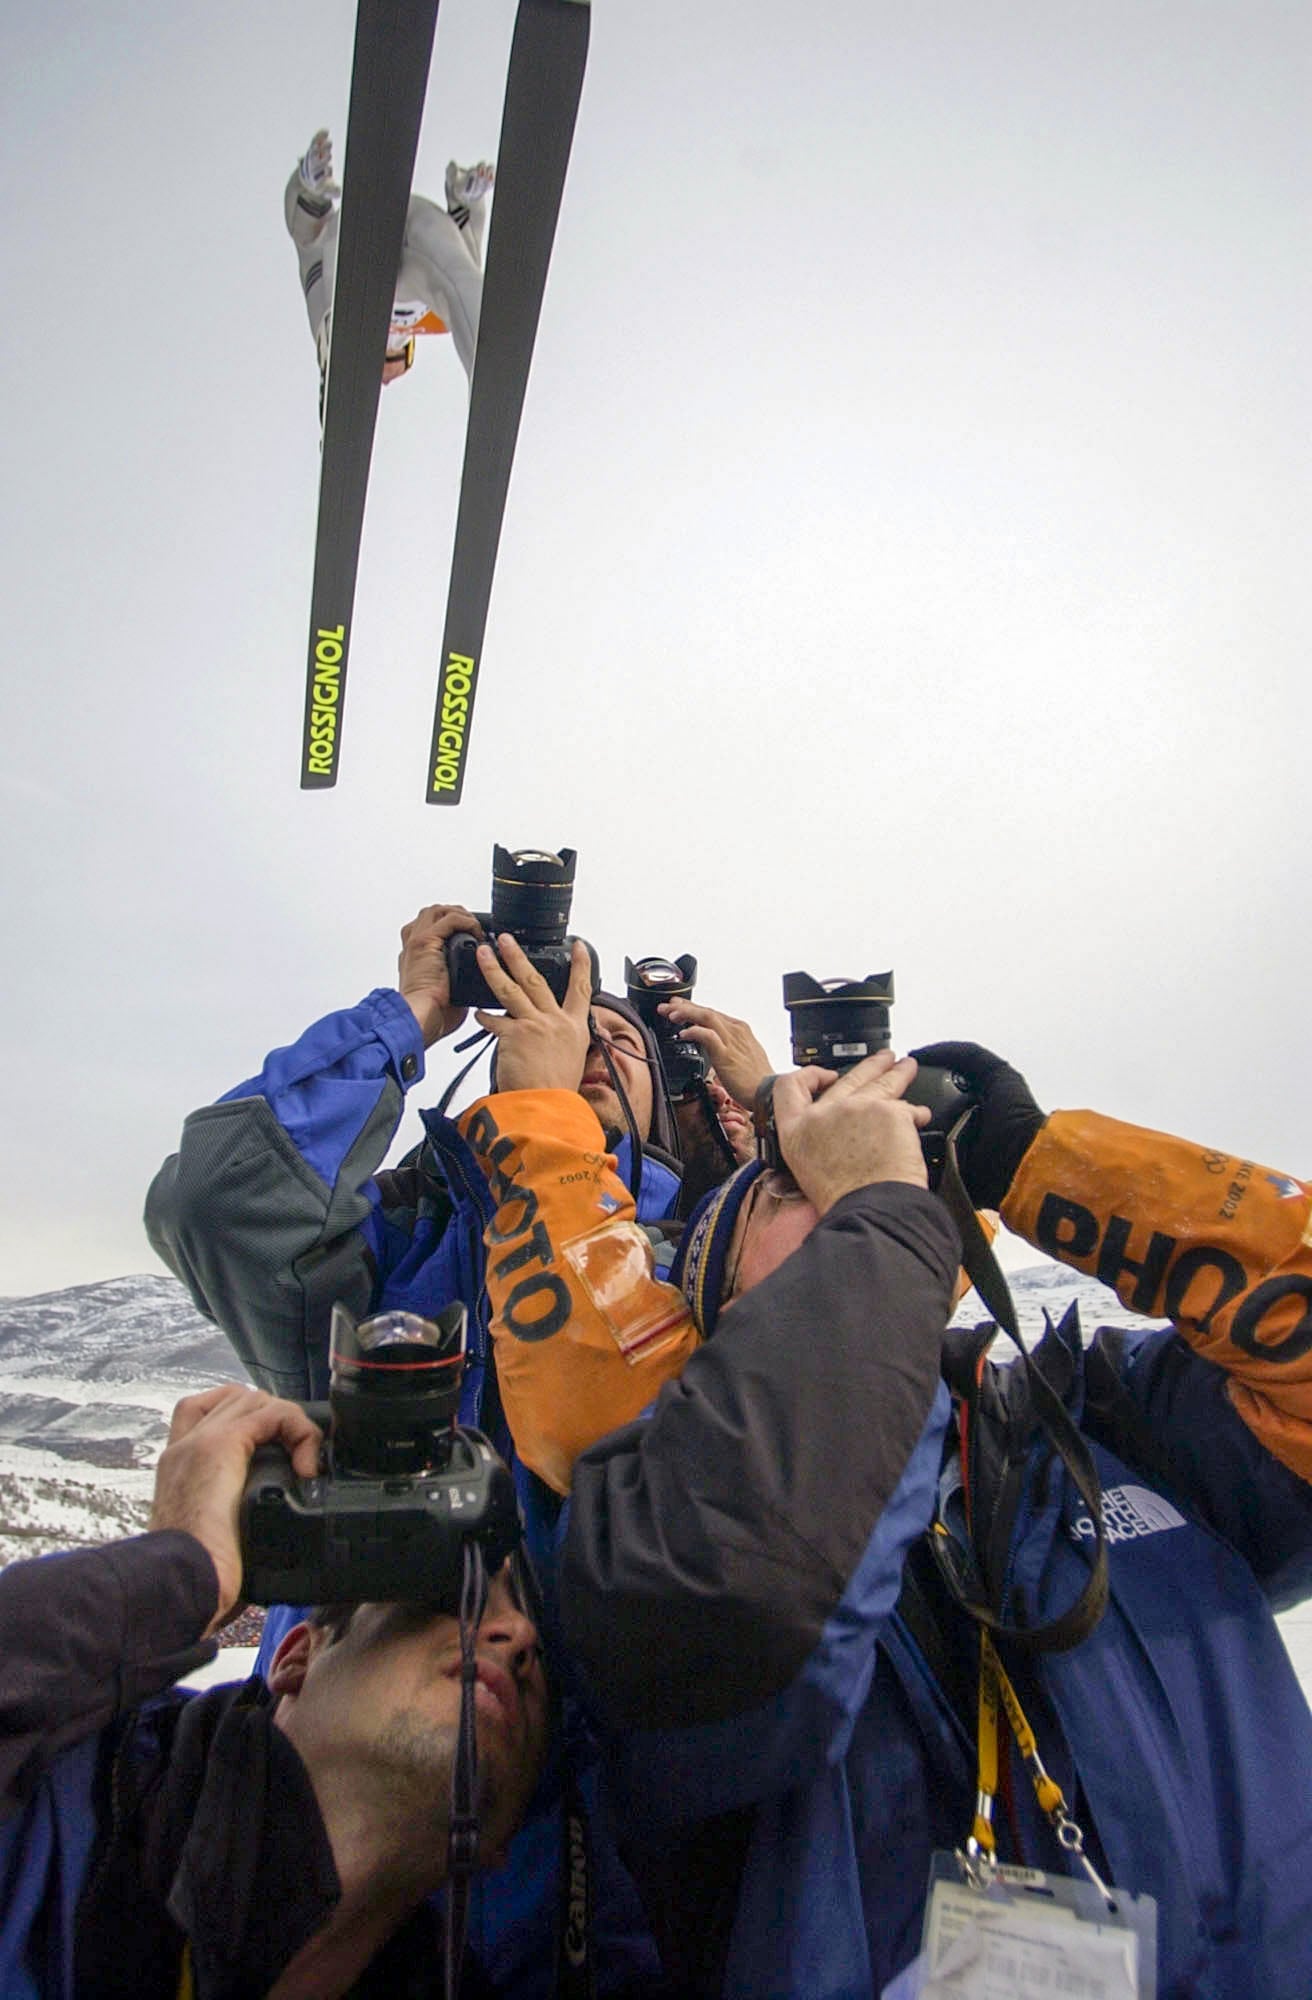 (Trent Nelson | The Salt Lake Tribune) Photographers positioned under the in-run during the ski jumping K120 team competition of the 2002 Winter Olympics Monday, Feb. 18, 2002 at Utah Olympic Park.